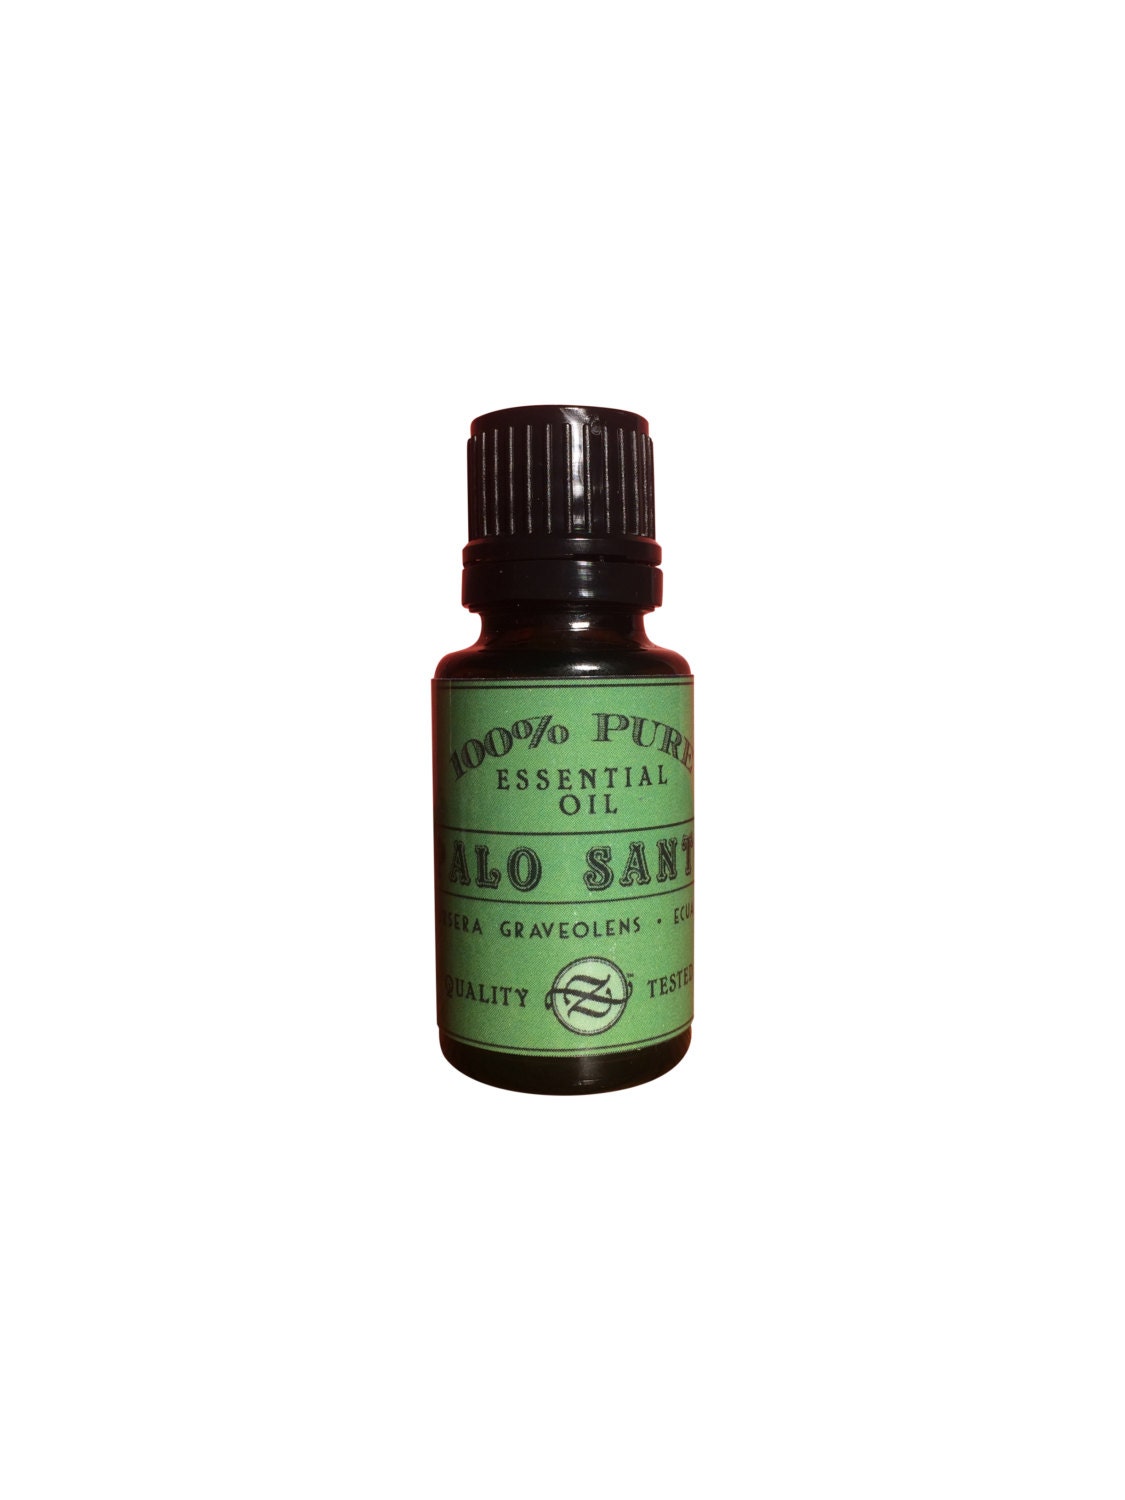 Wild White Oud Essential Oil, (Aetoxylon Sympetalum). 100% Pure and natural.